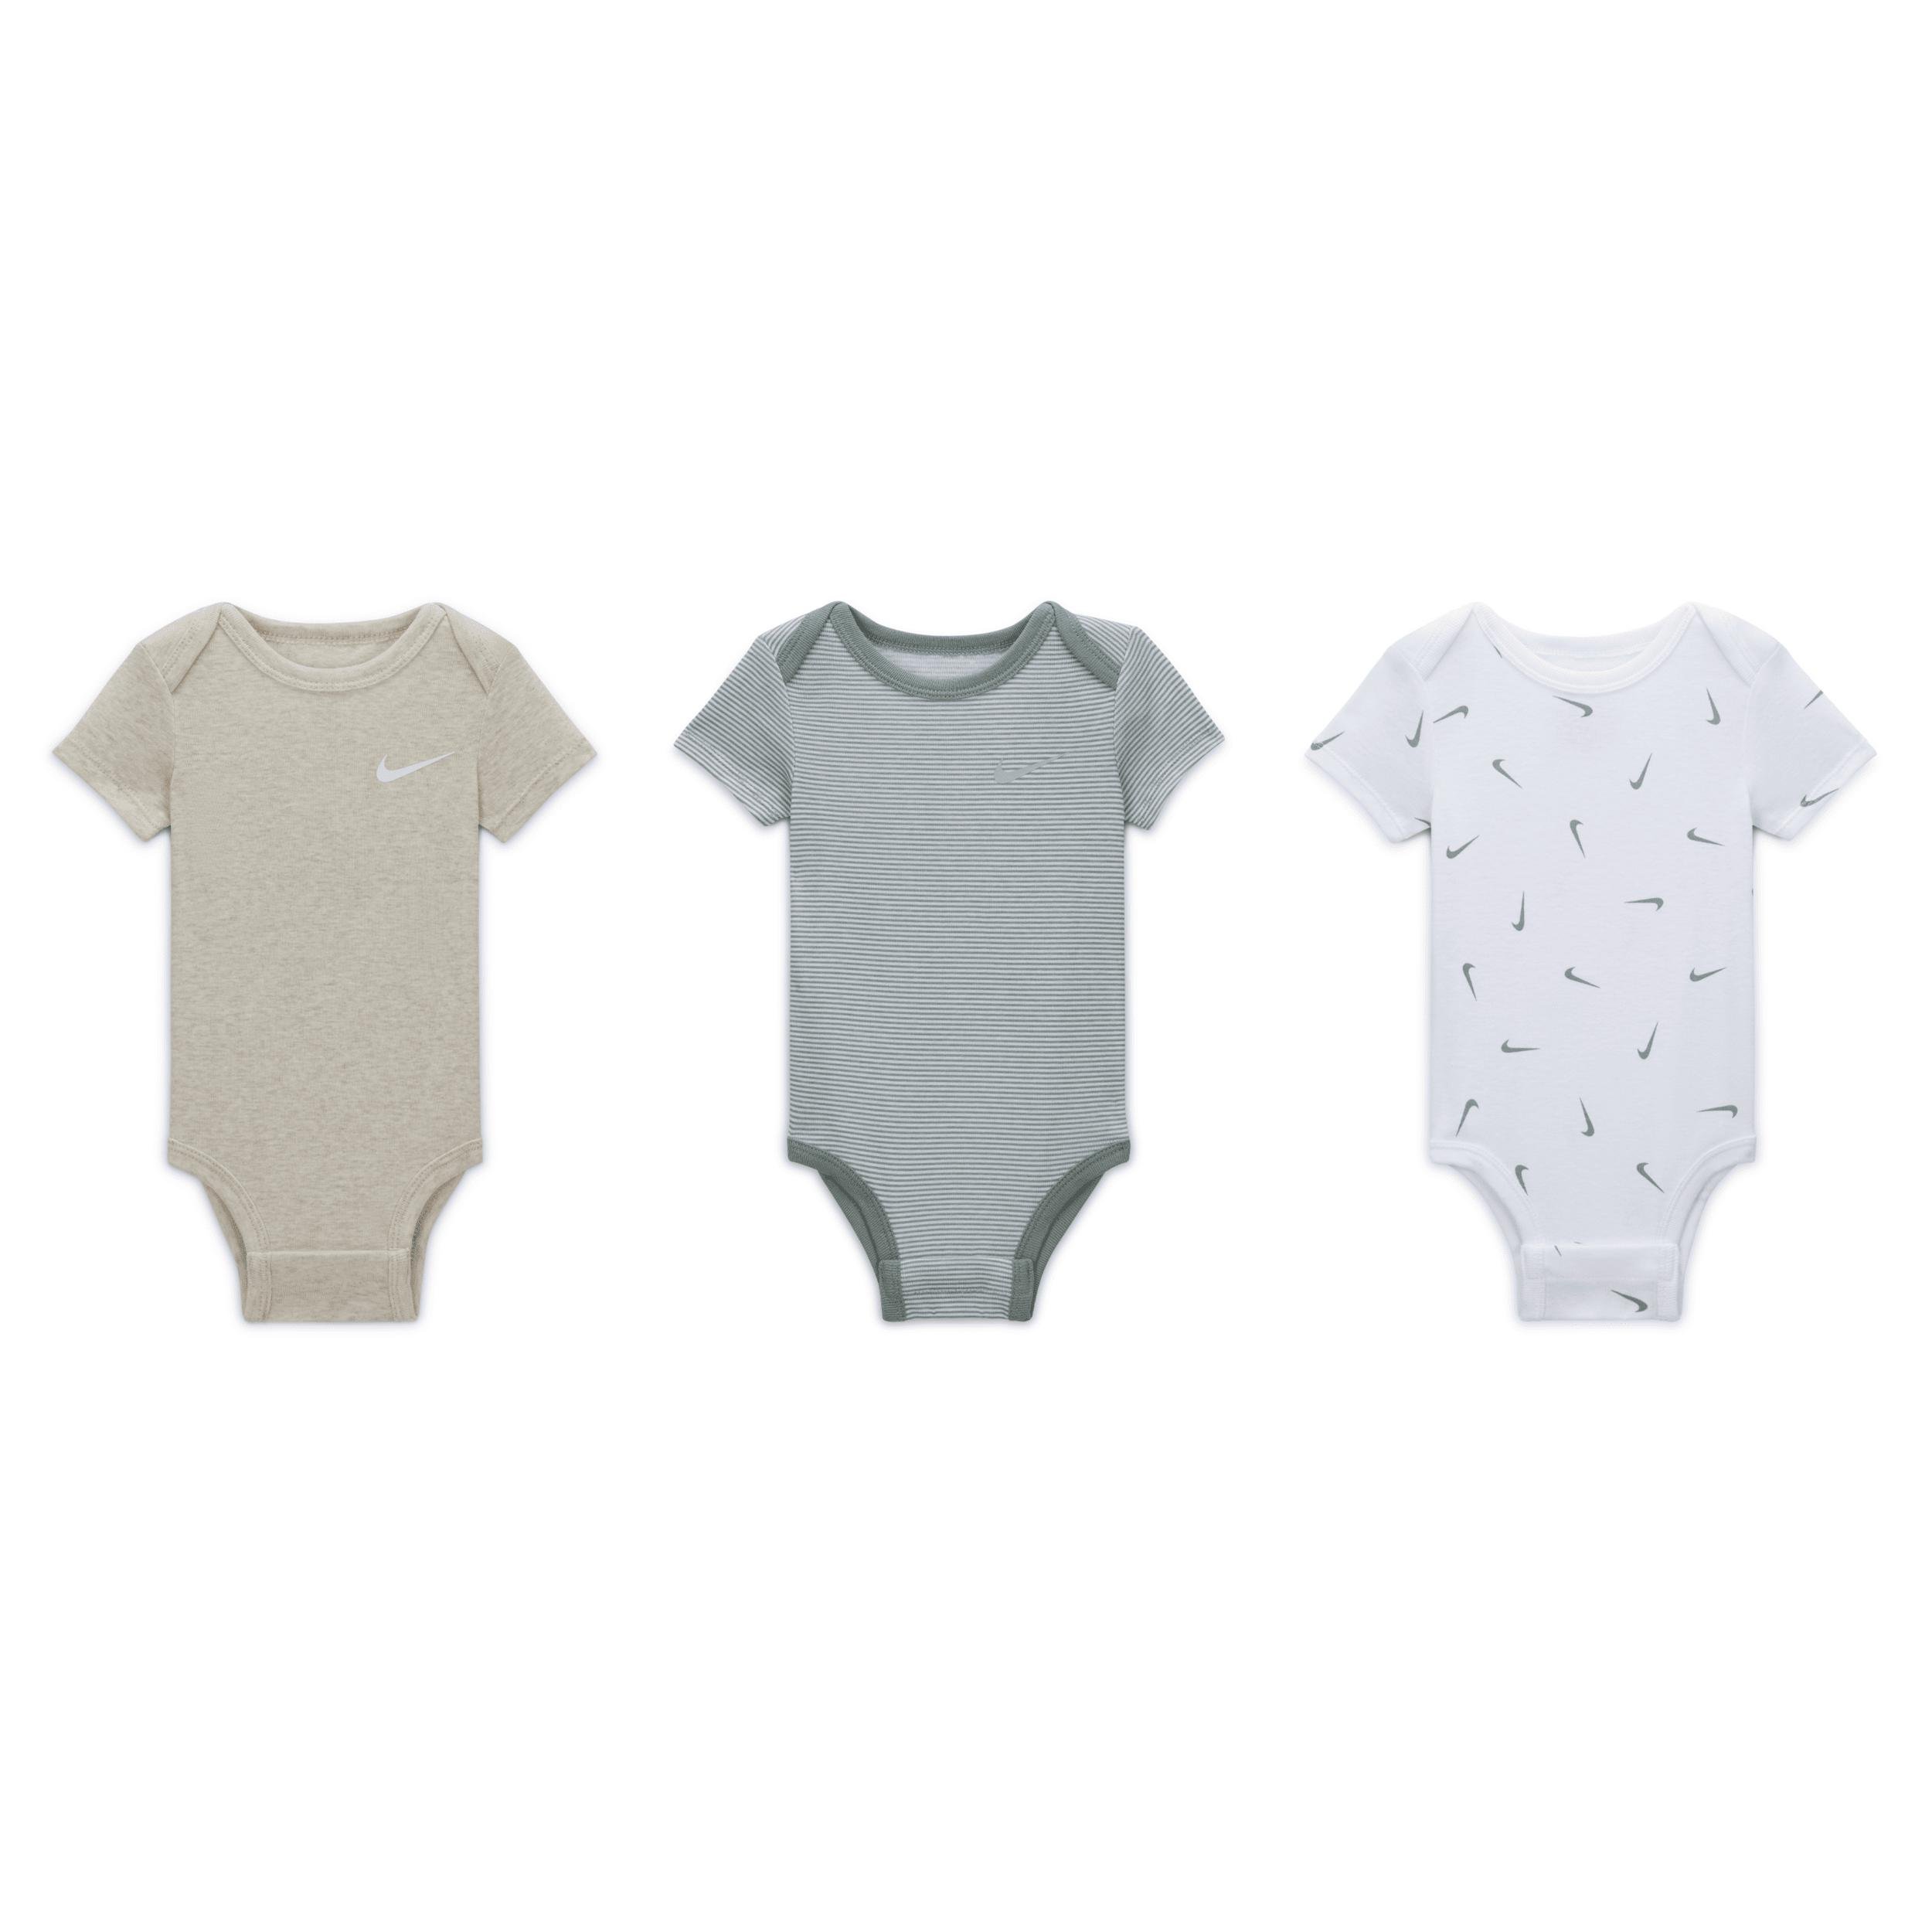 Nike Baby Essentials Baby (0-9M) 3-Pack Bodysuits by NIKE